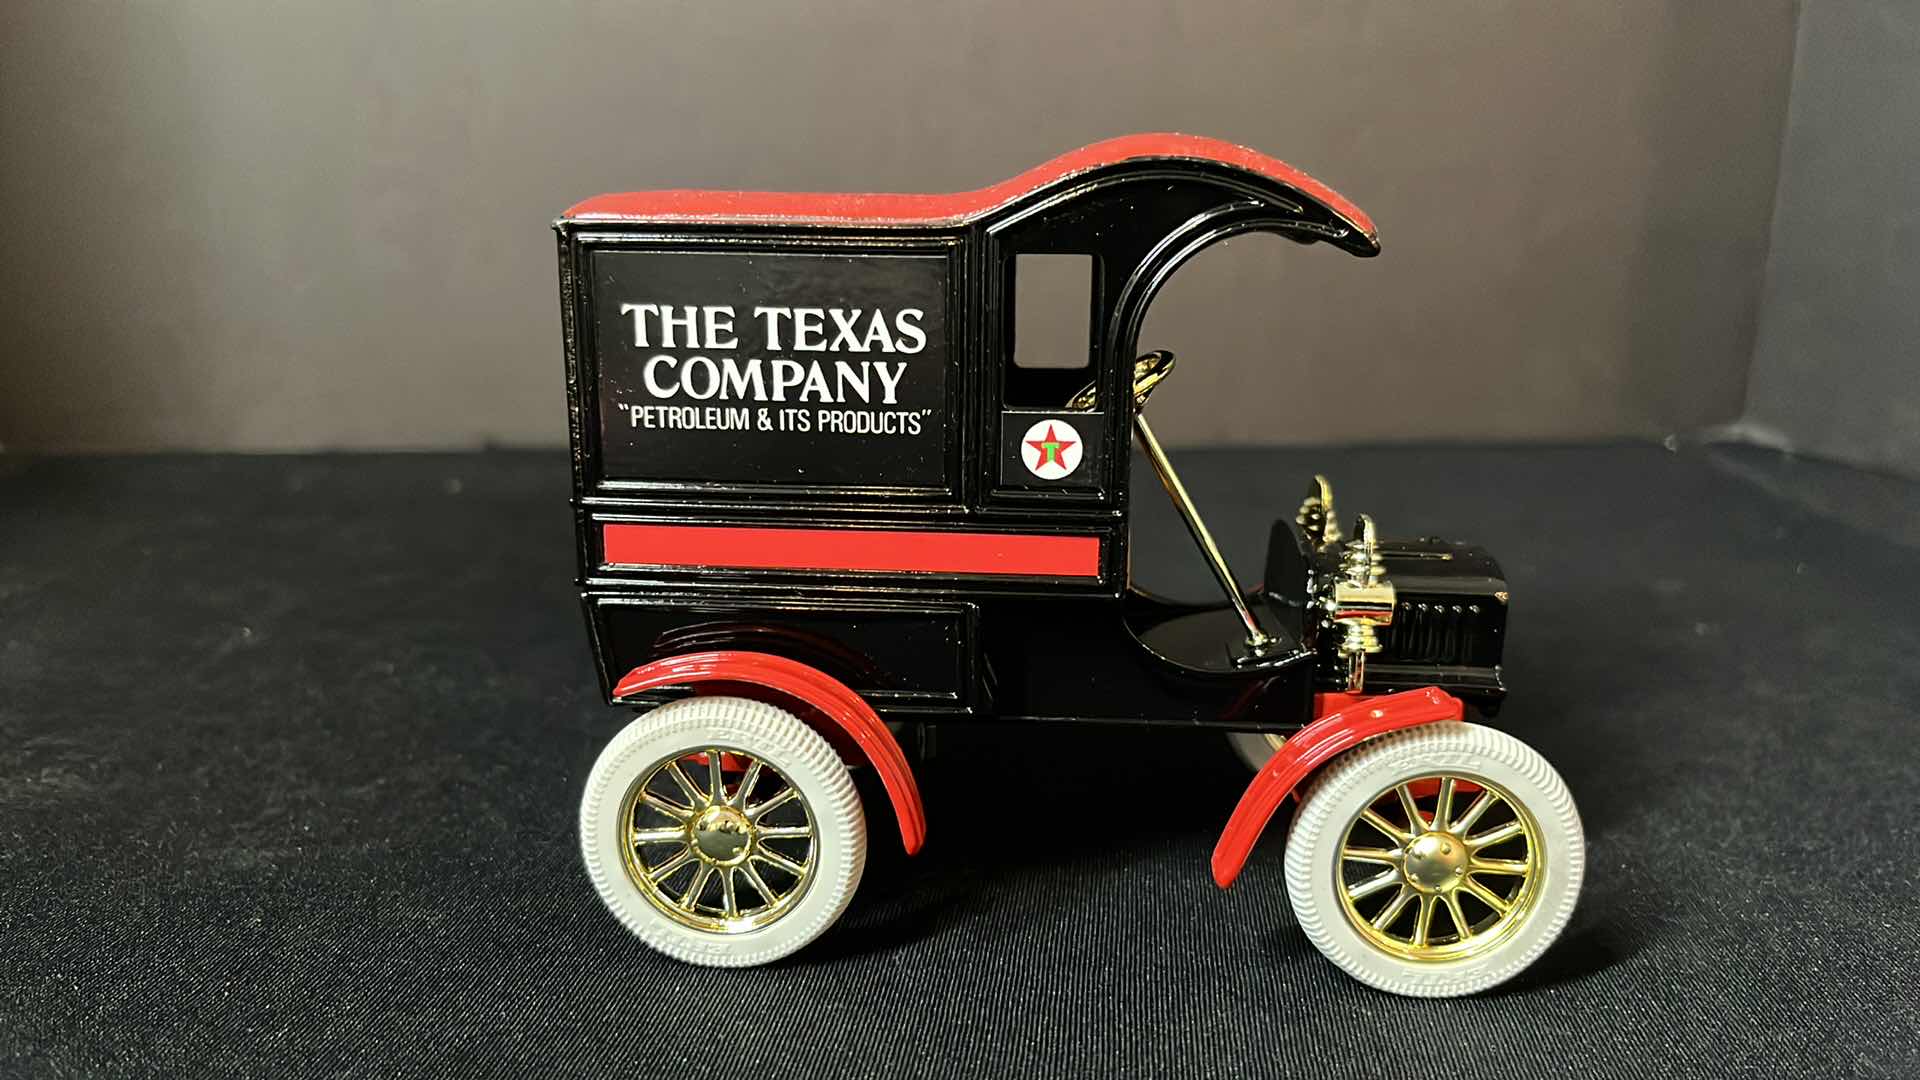 Photo 4 of ERTL DIE-CAST METAL NOSTALGIC COLLECTOR SERIES #4 TEXACO 1905 FORD DELIVERY CAR LOCKING COIN BANK W KEY, 1994 (STOCK NO 9321UO)